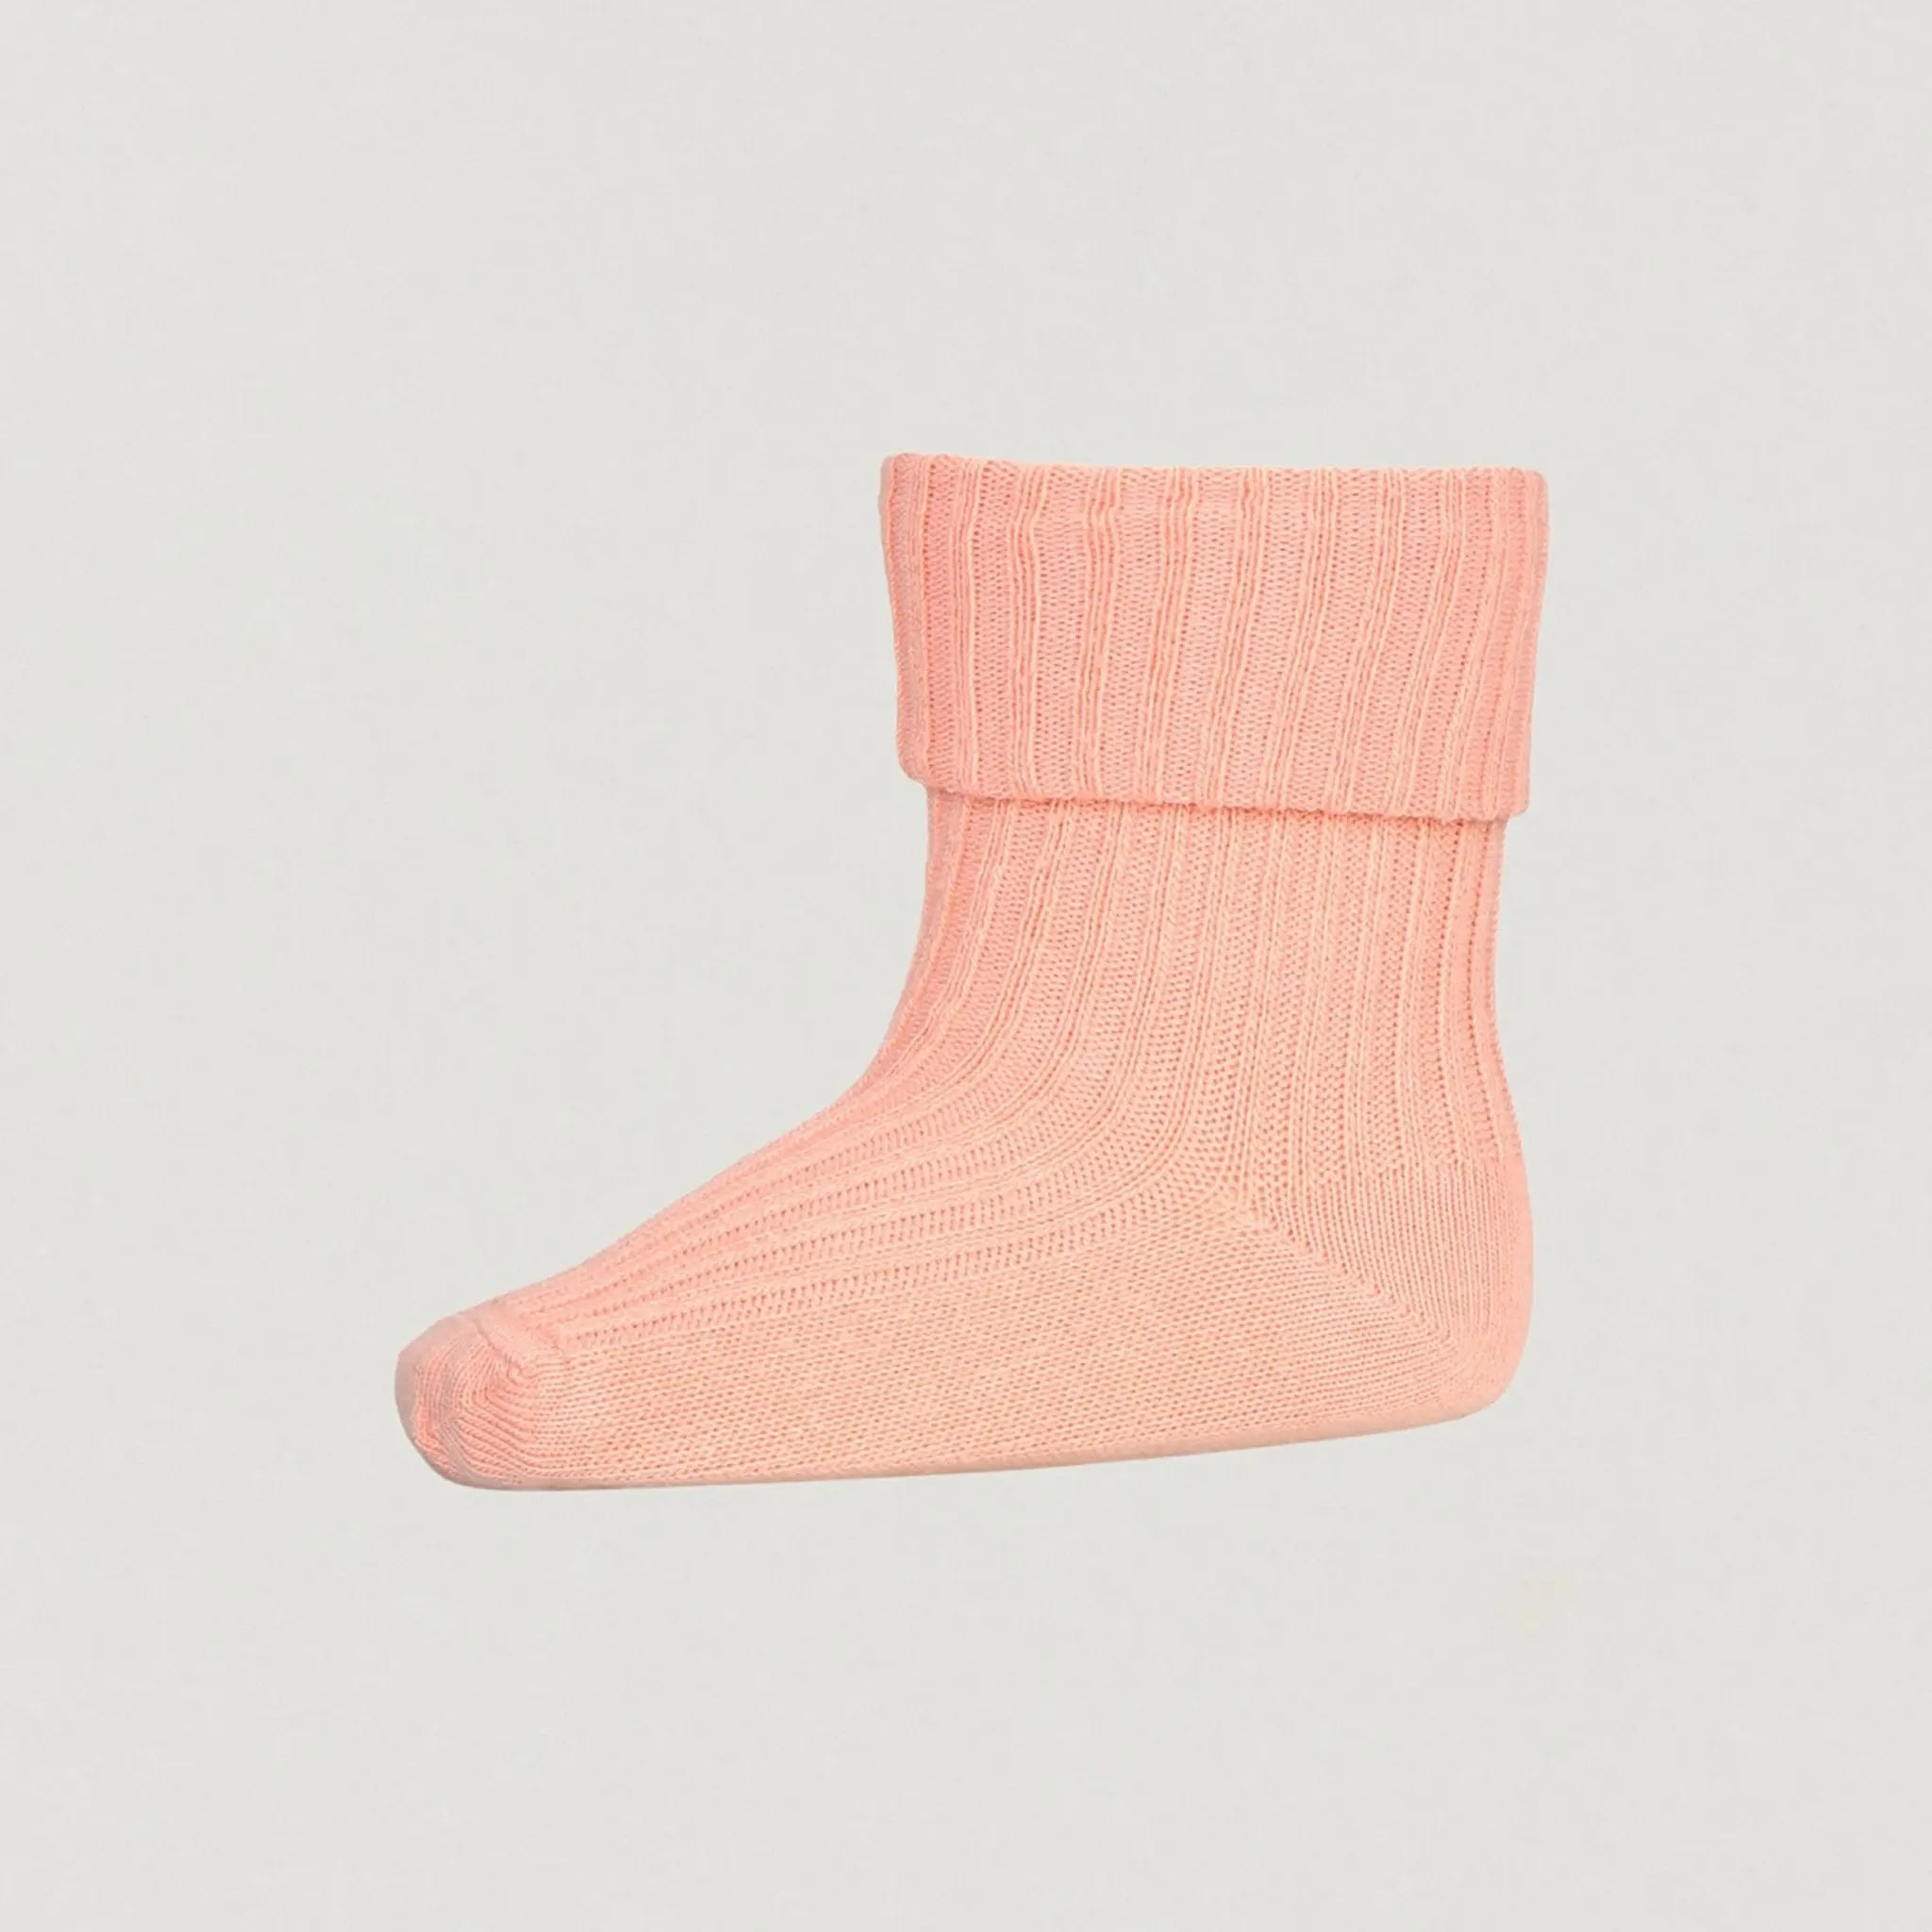 Babybox and Family MP Denmark Socken aus Baumwolle SS2022 15-16 apricot-4272 #farbe_15-16